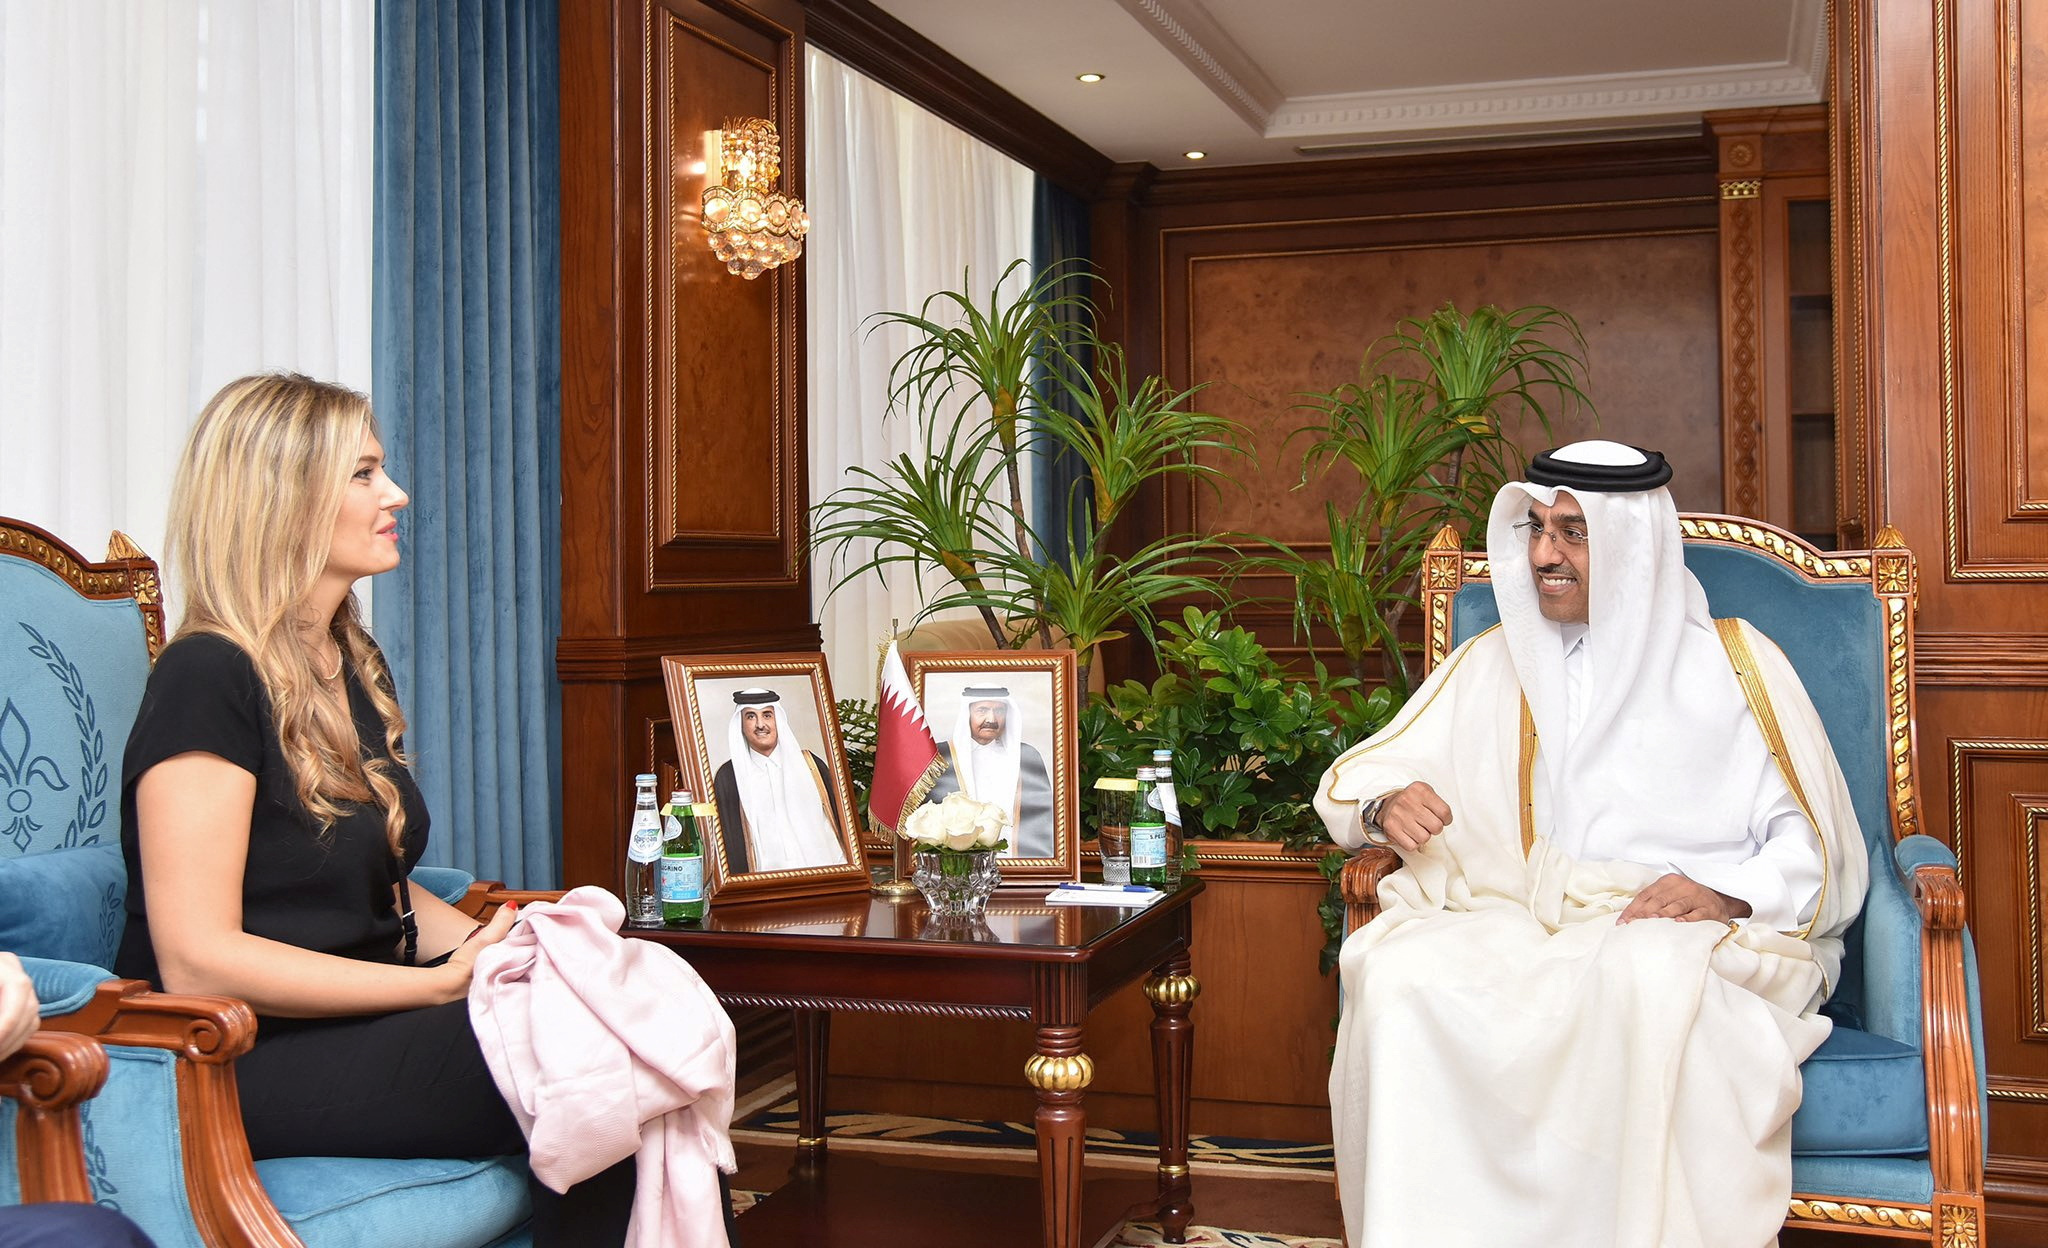 Al Marri, the Minister of Labor of Qatar, met with the Vice President of the European Parliament, Kylie, during a meeting in Qatar